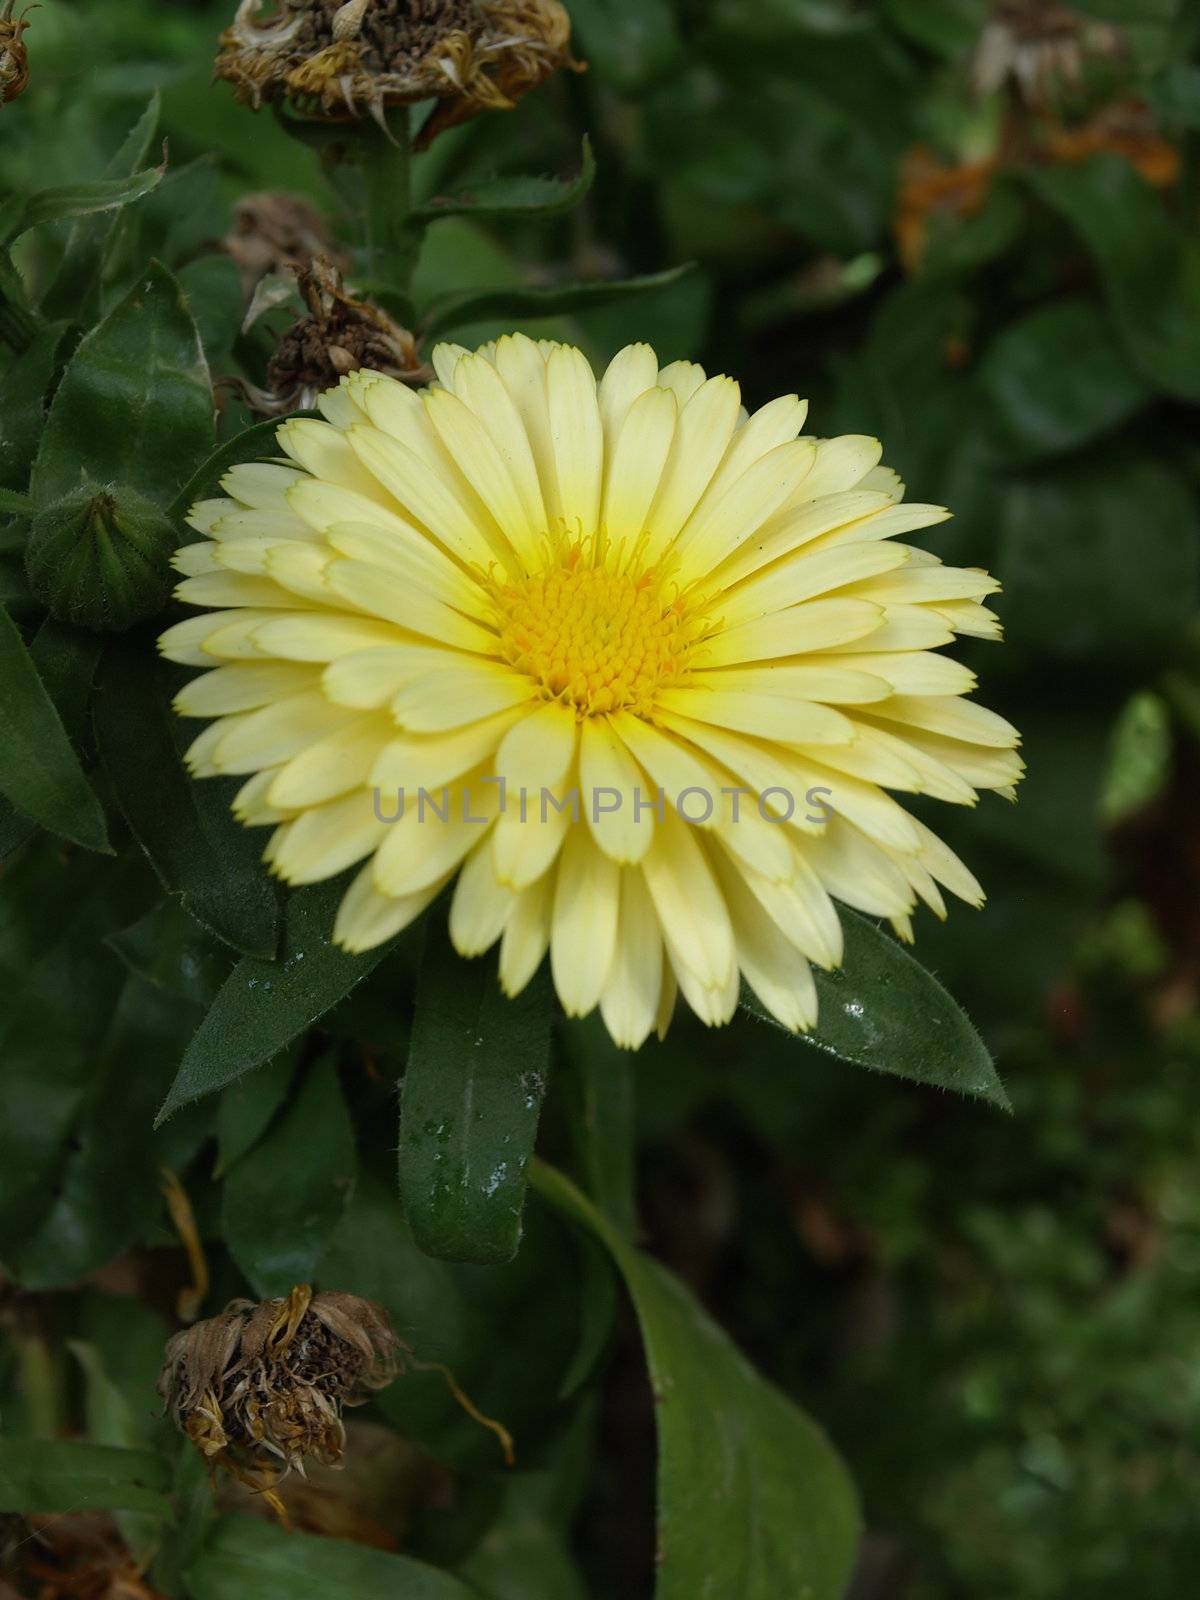 A beautiful yellow daisy against a background of dark green foliage.